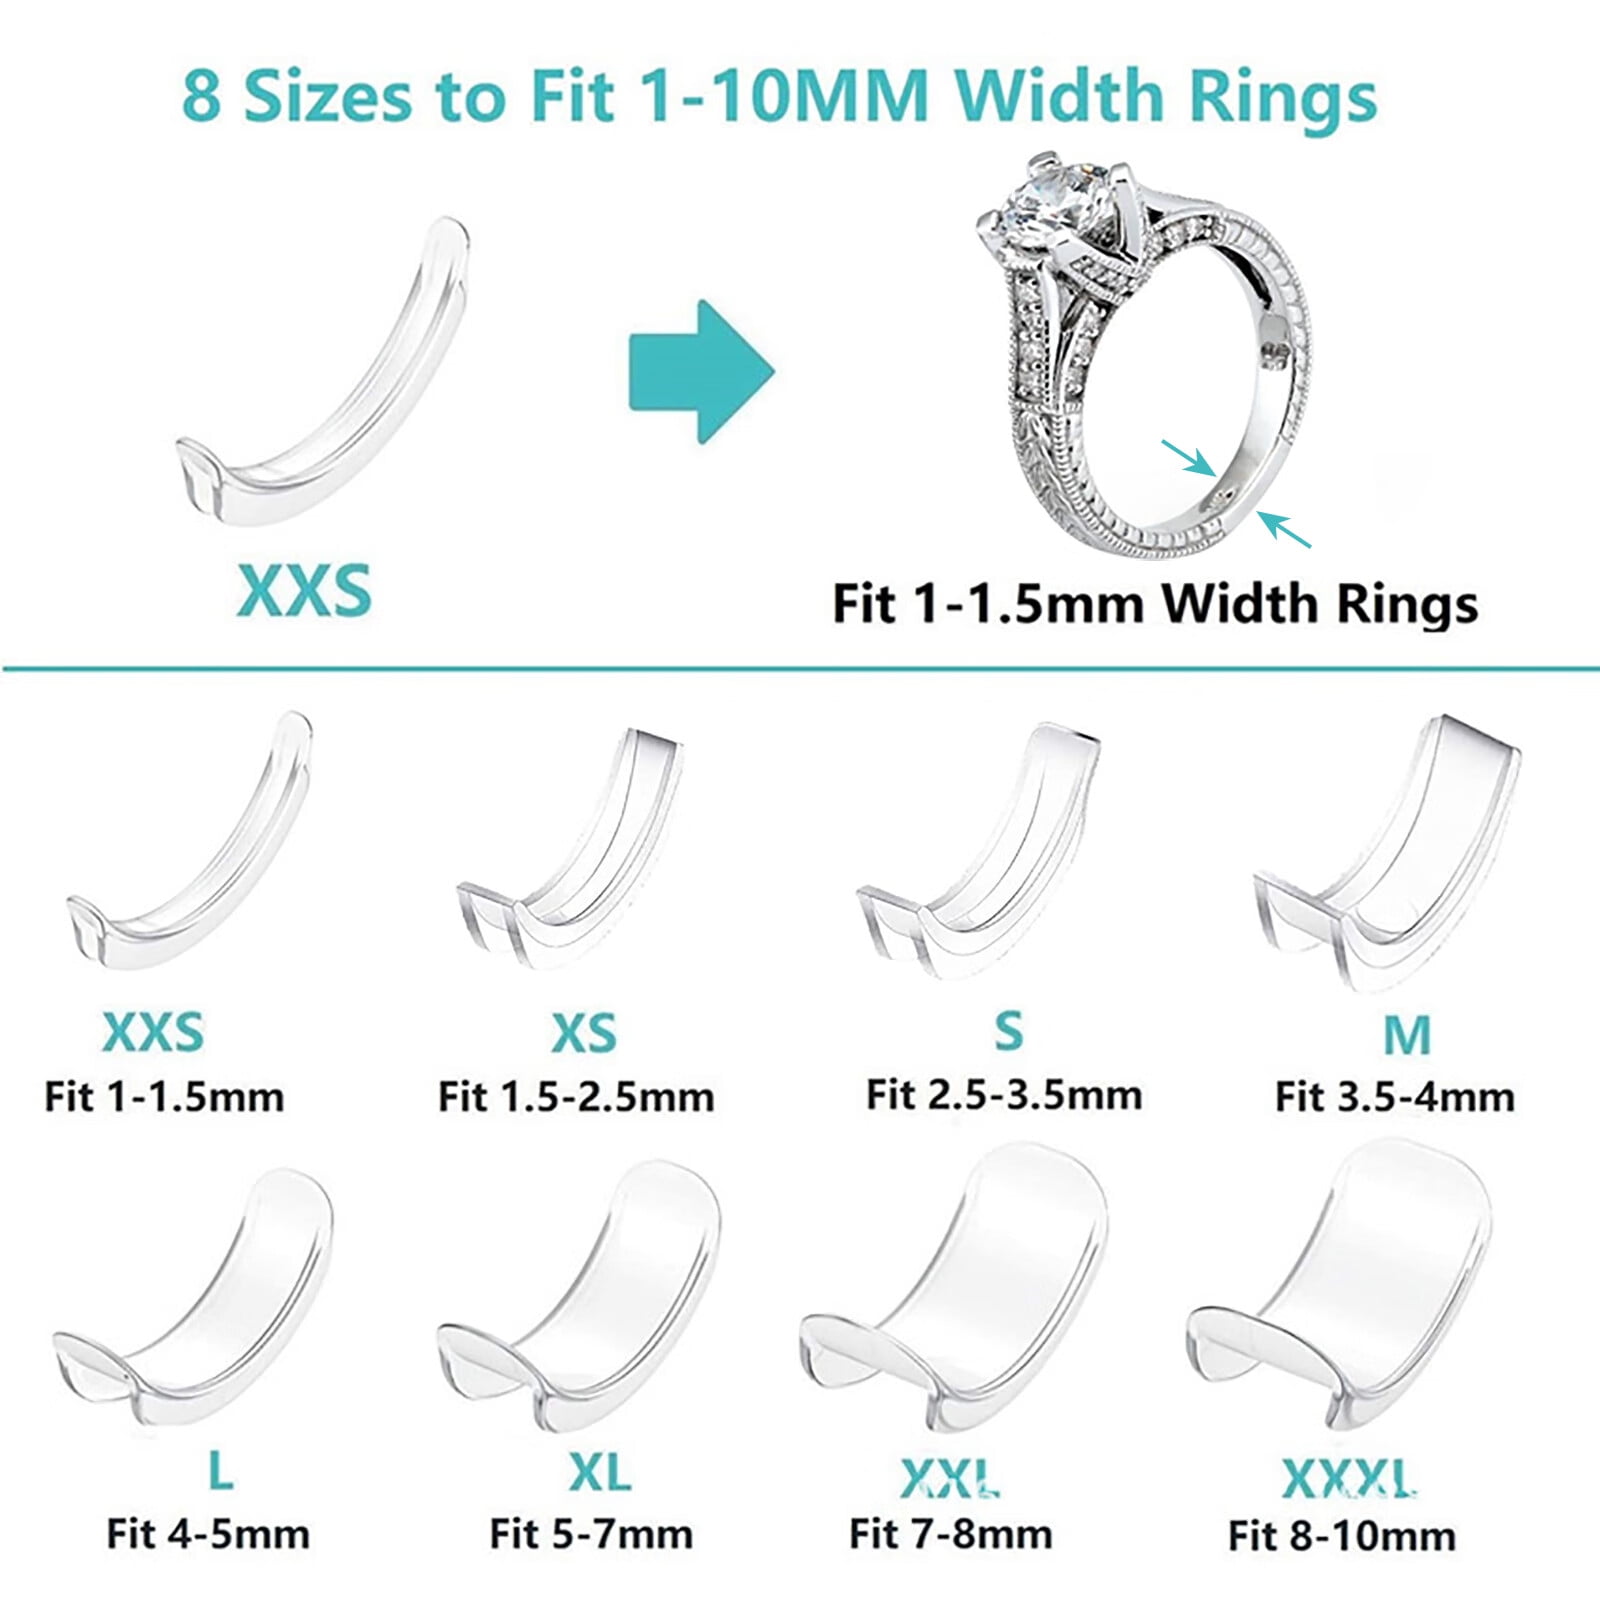 Ring Size Adjuster for Loose Rings 8 Pack 8 Sizes Invisible Silicone Guard Clip 104ee471 4e2b 48c6 b2b5 1ea058670d77.c1edd1ce9bb707b0d34f9a84e5a8391c